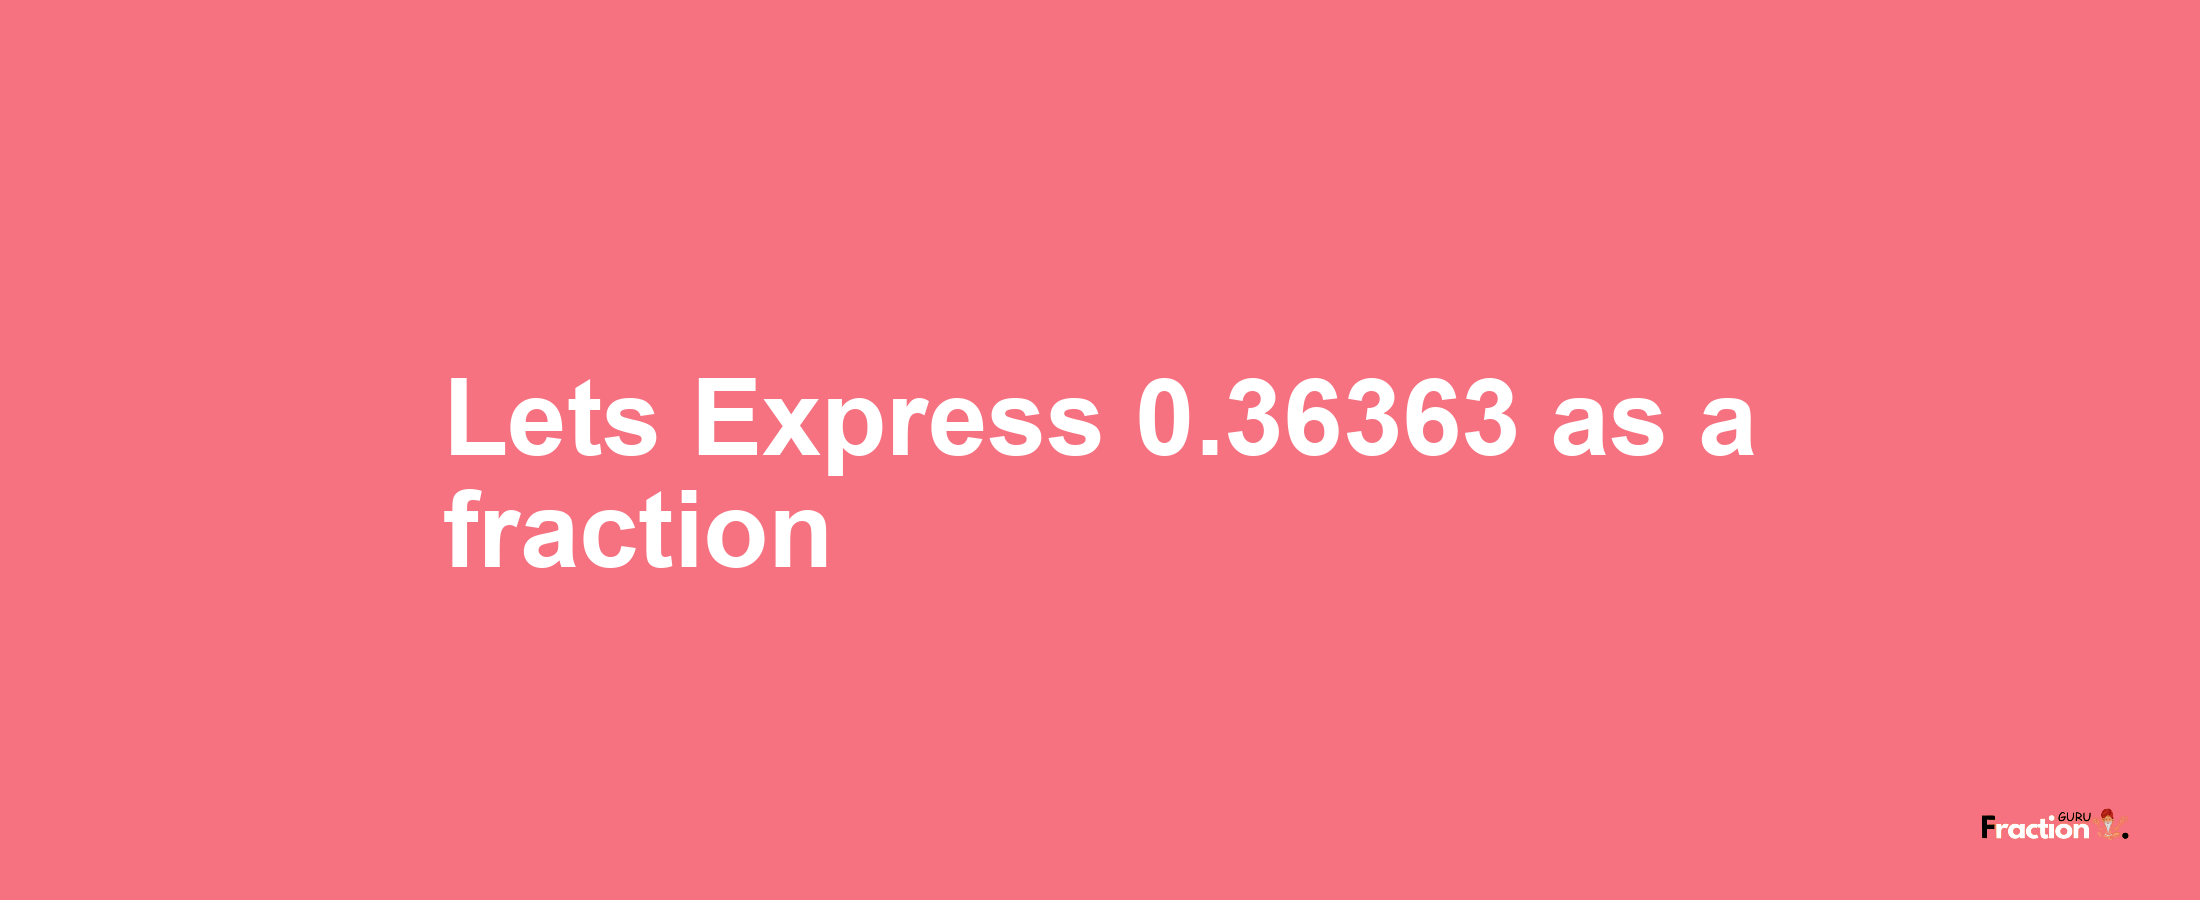 Lets Express 0.36363 as afraction